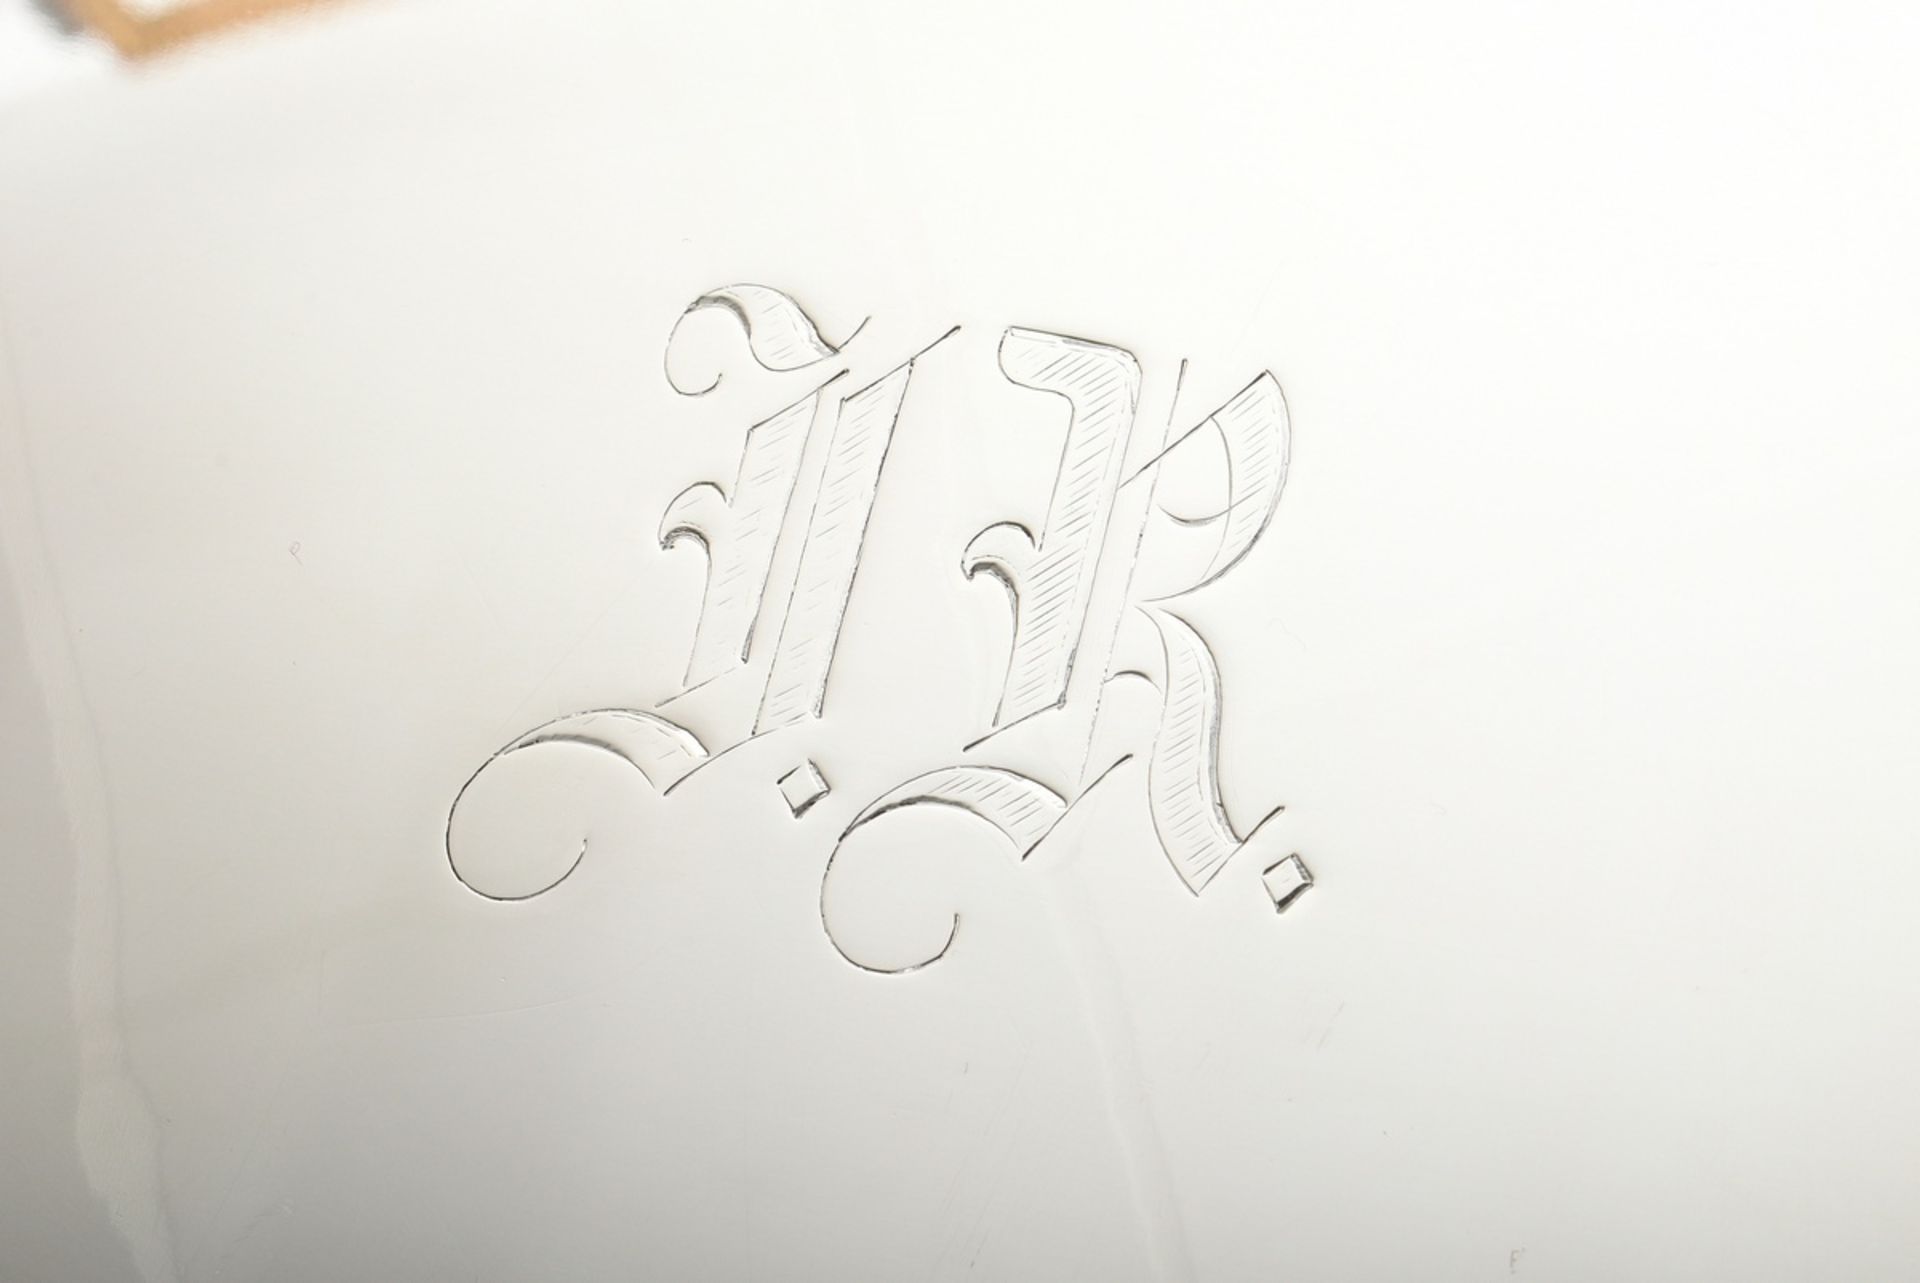 Rectangular tray in a simple design with side handles and monogram in Fraktur script ‘JR’ and date  - Image 2 of 6